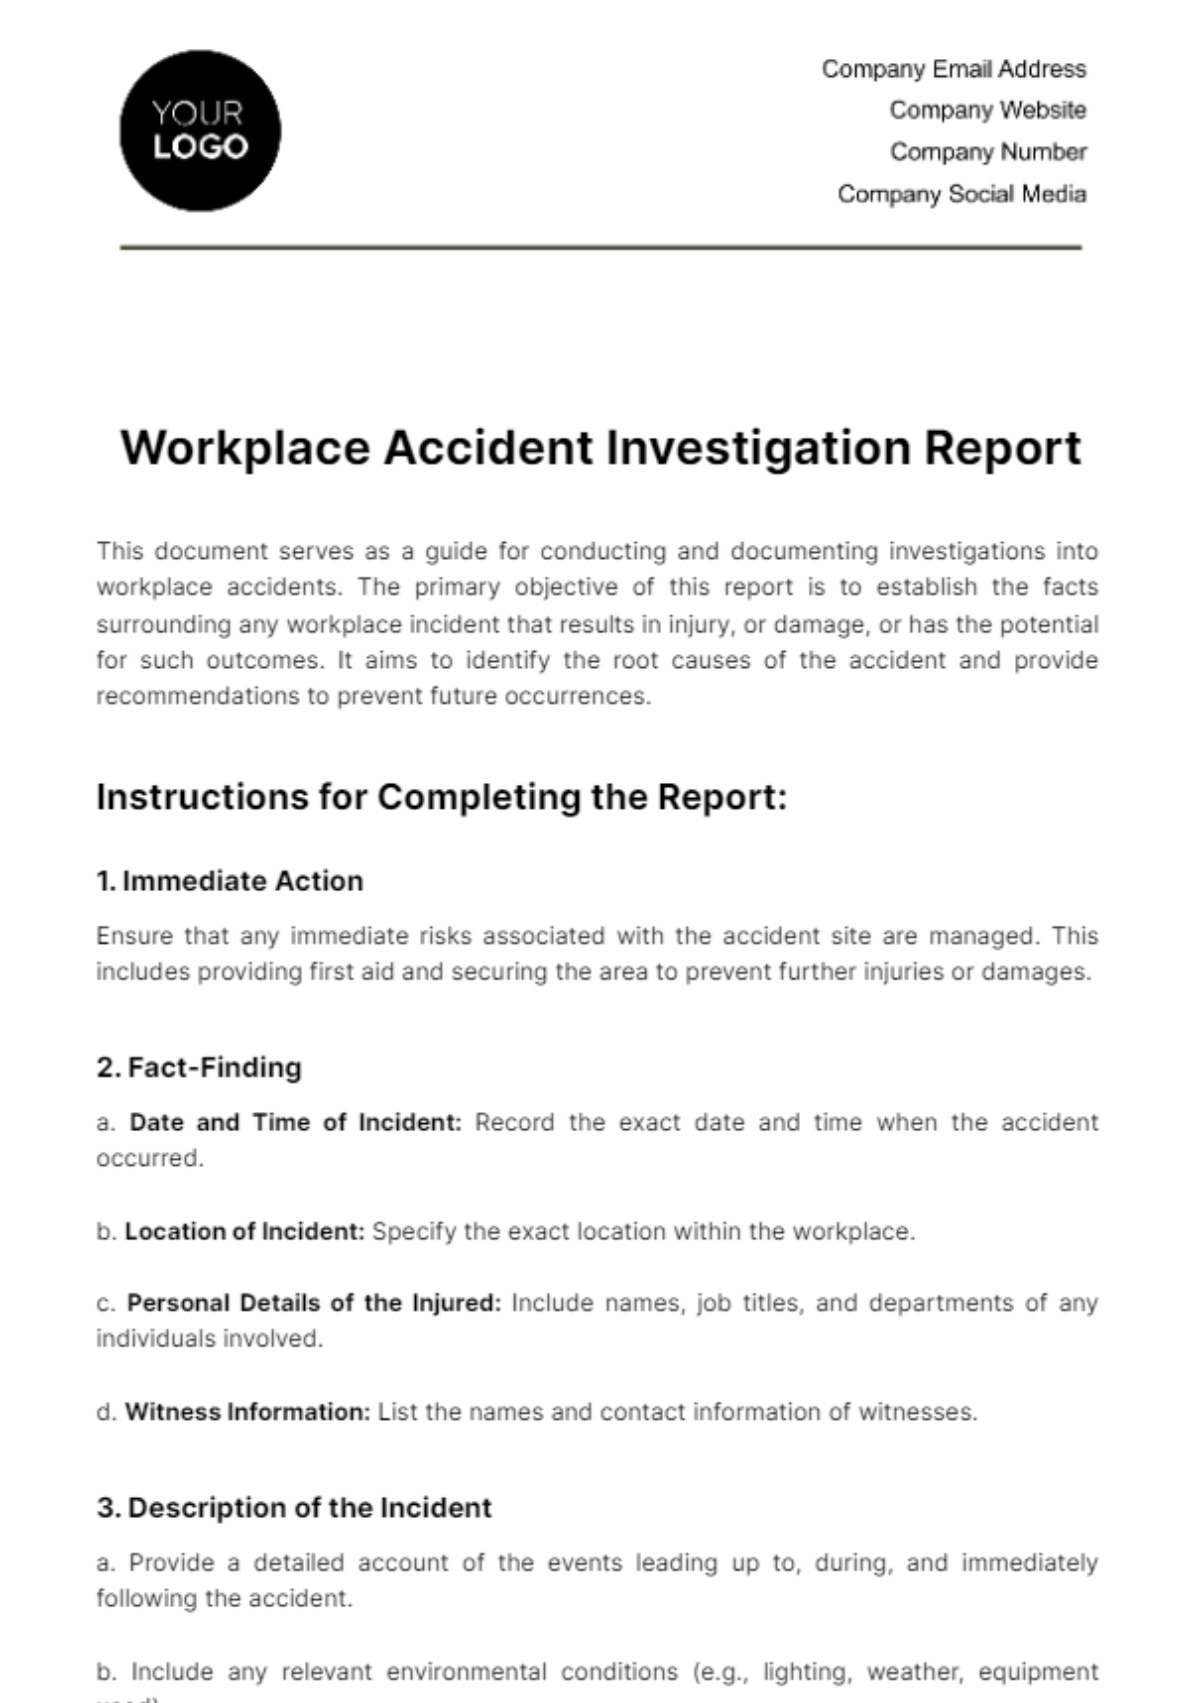 Free Workplace Accident Investigation Report Template